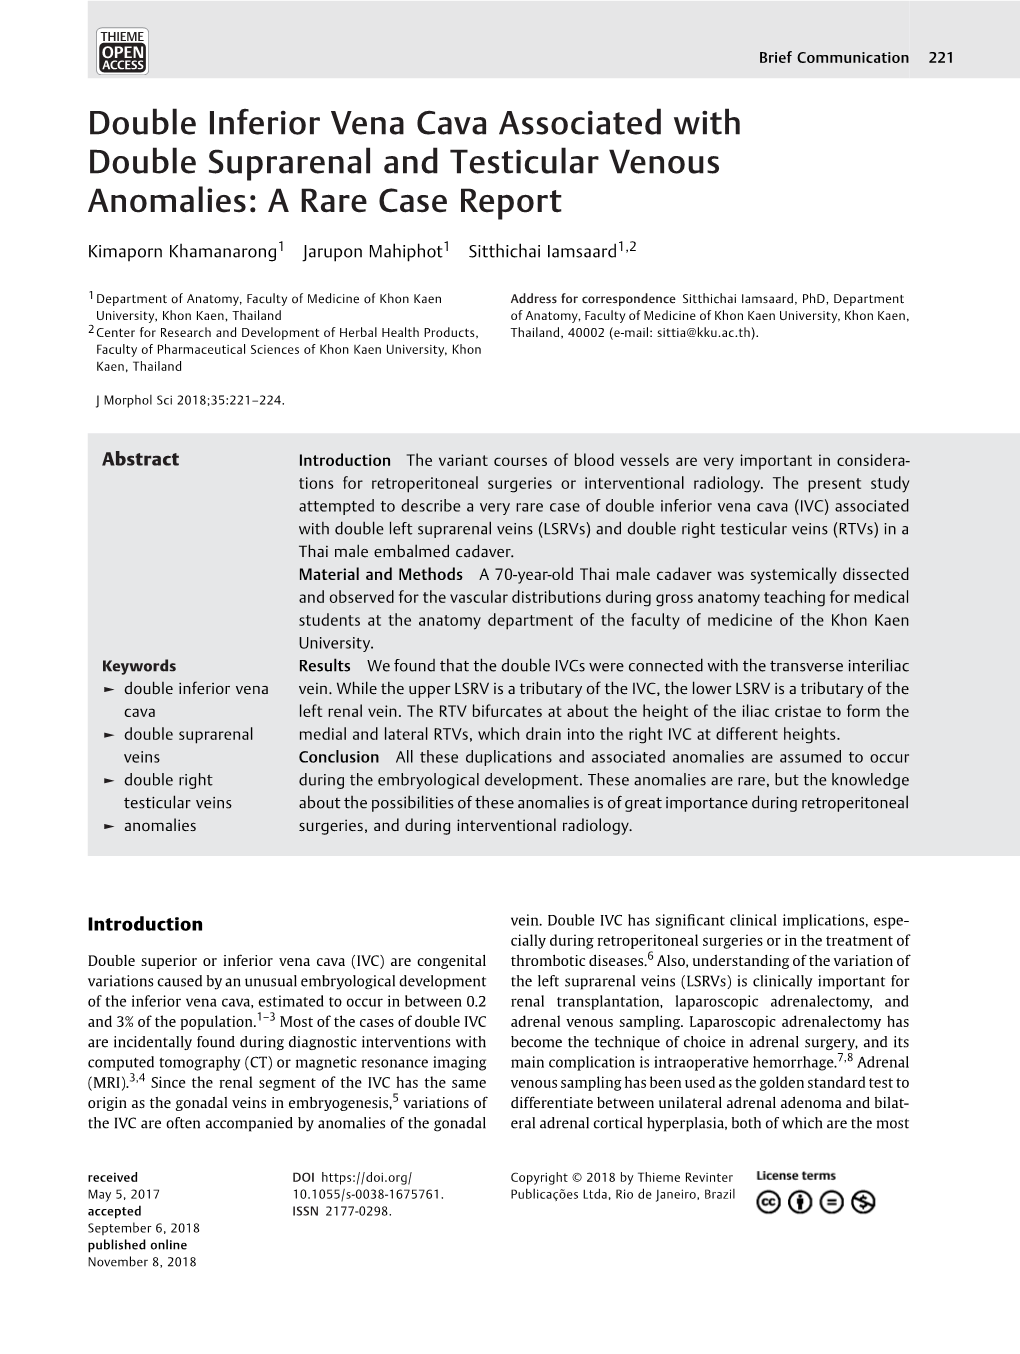 Double Inferior Vena Cava Associated with Double Suprarenal and Testicular Venous Anomalies: a Rare Case Report